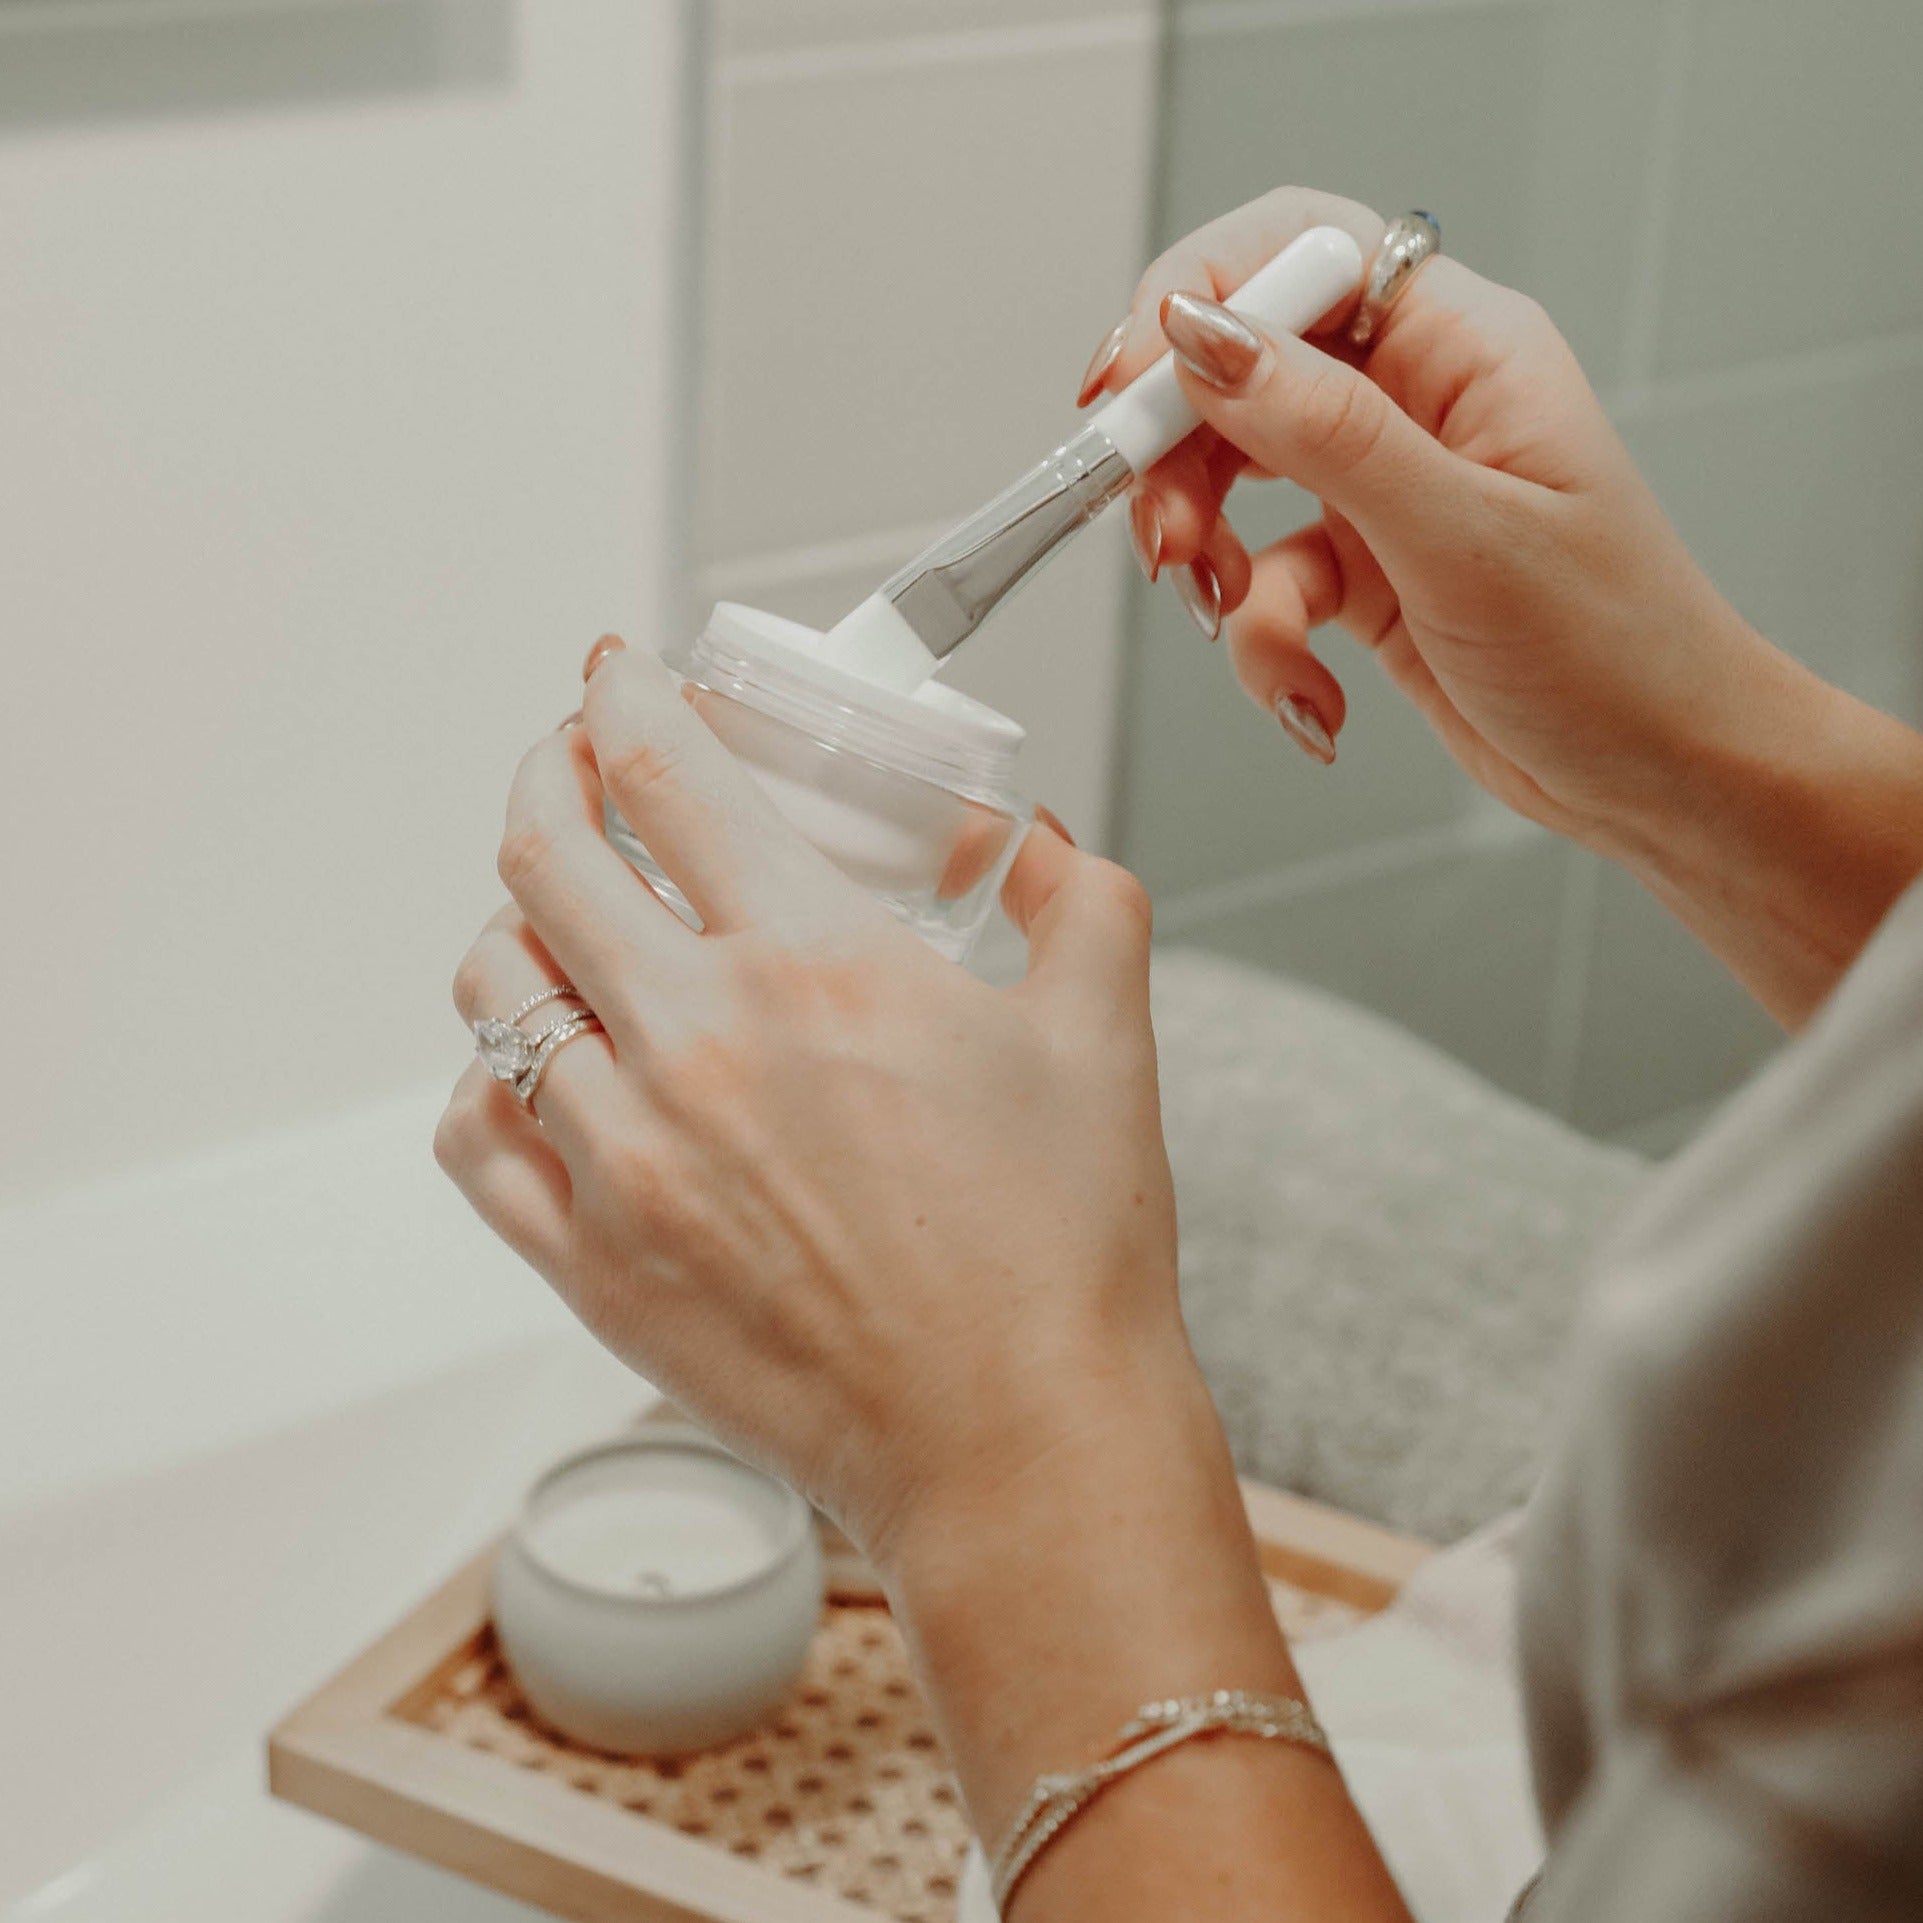 Woman's hands dipping a face mask applicator brush into a pot of face lotion.